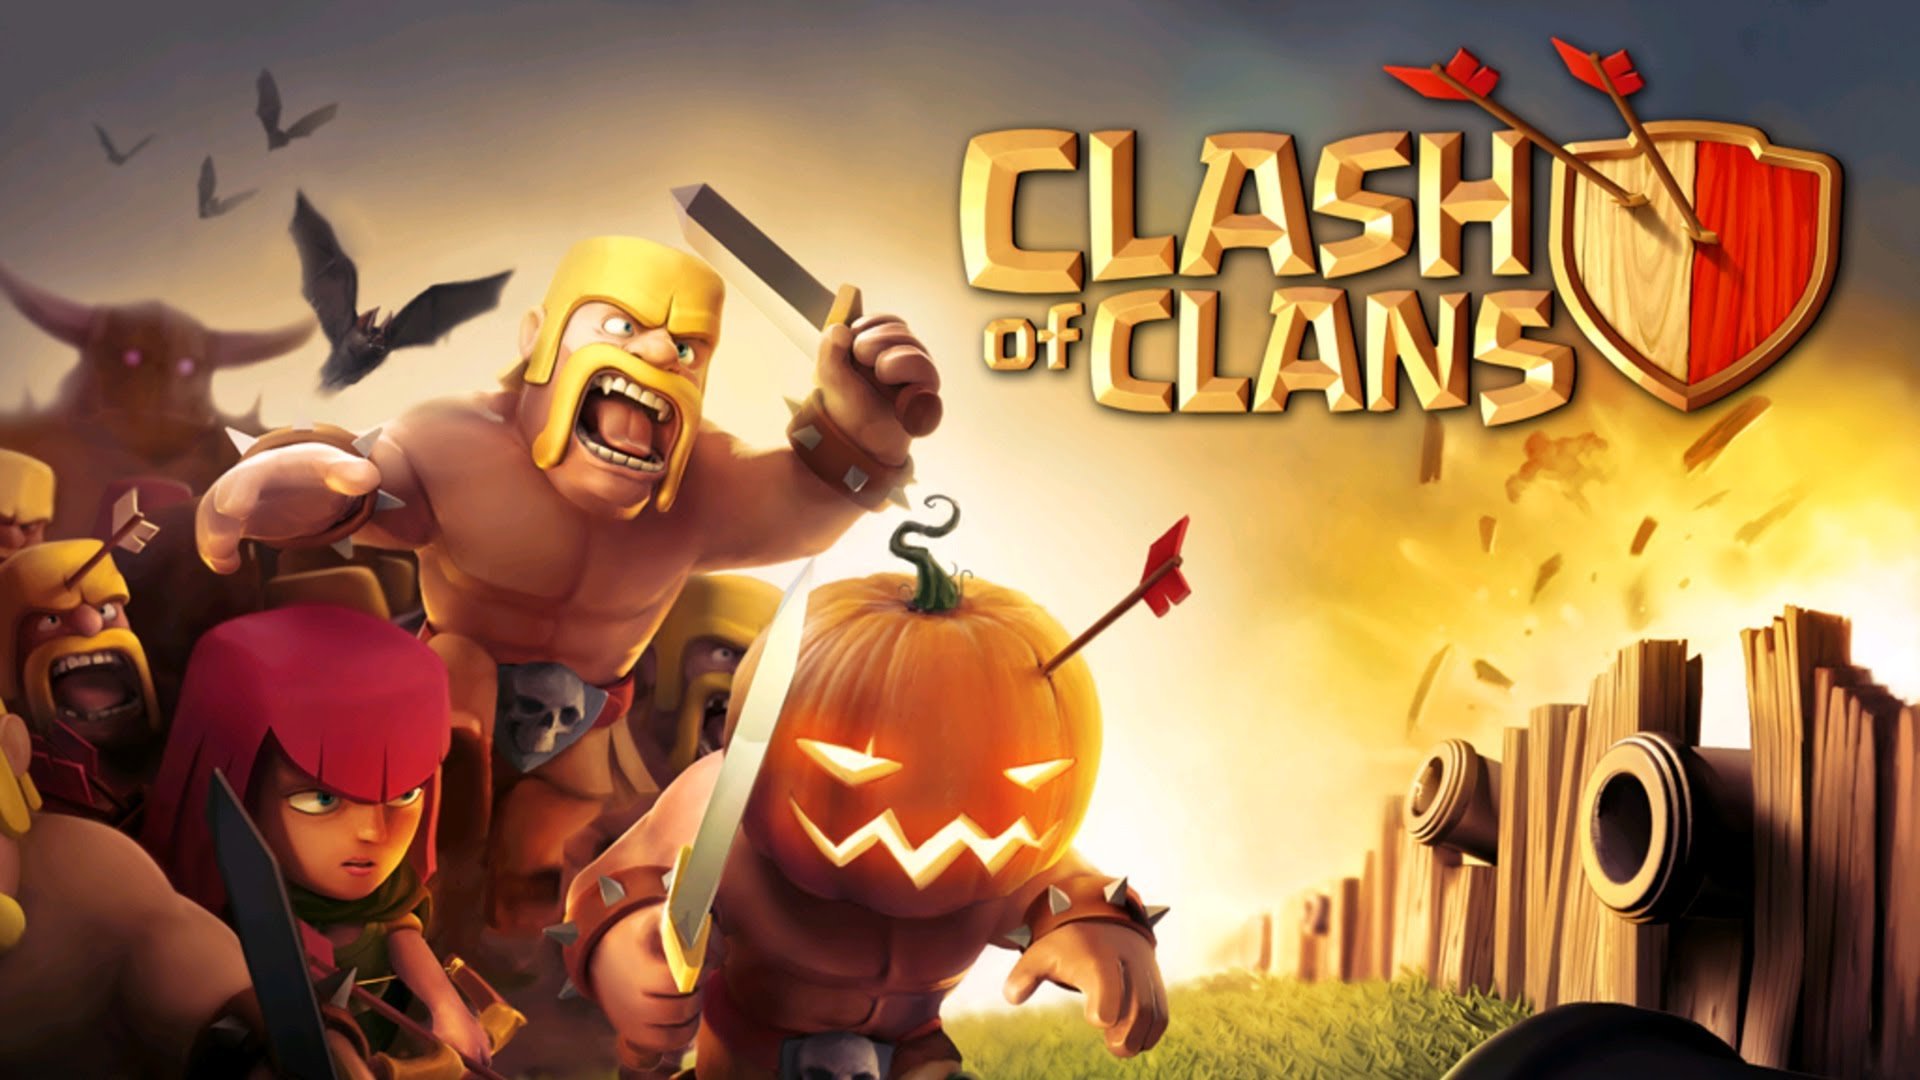 Clash Of Clans Live Action Movie Download